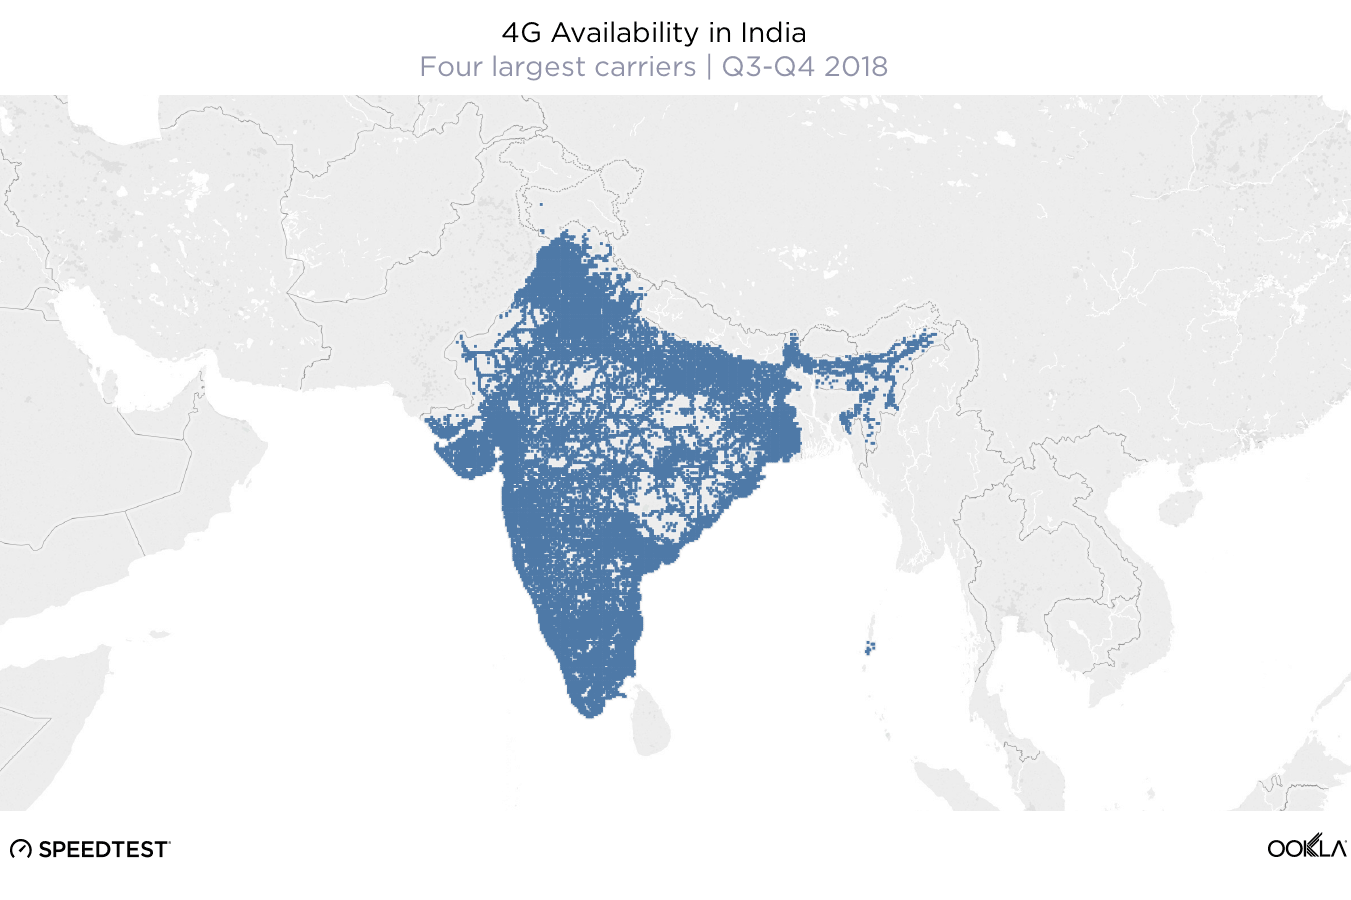 4G availability in India